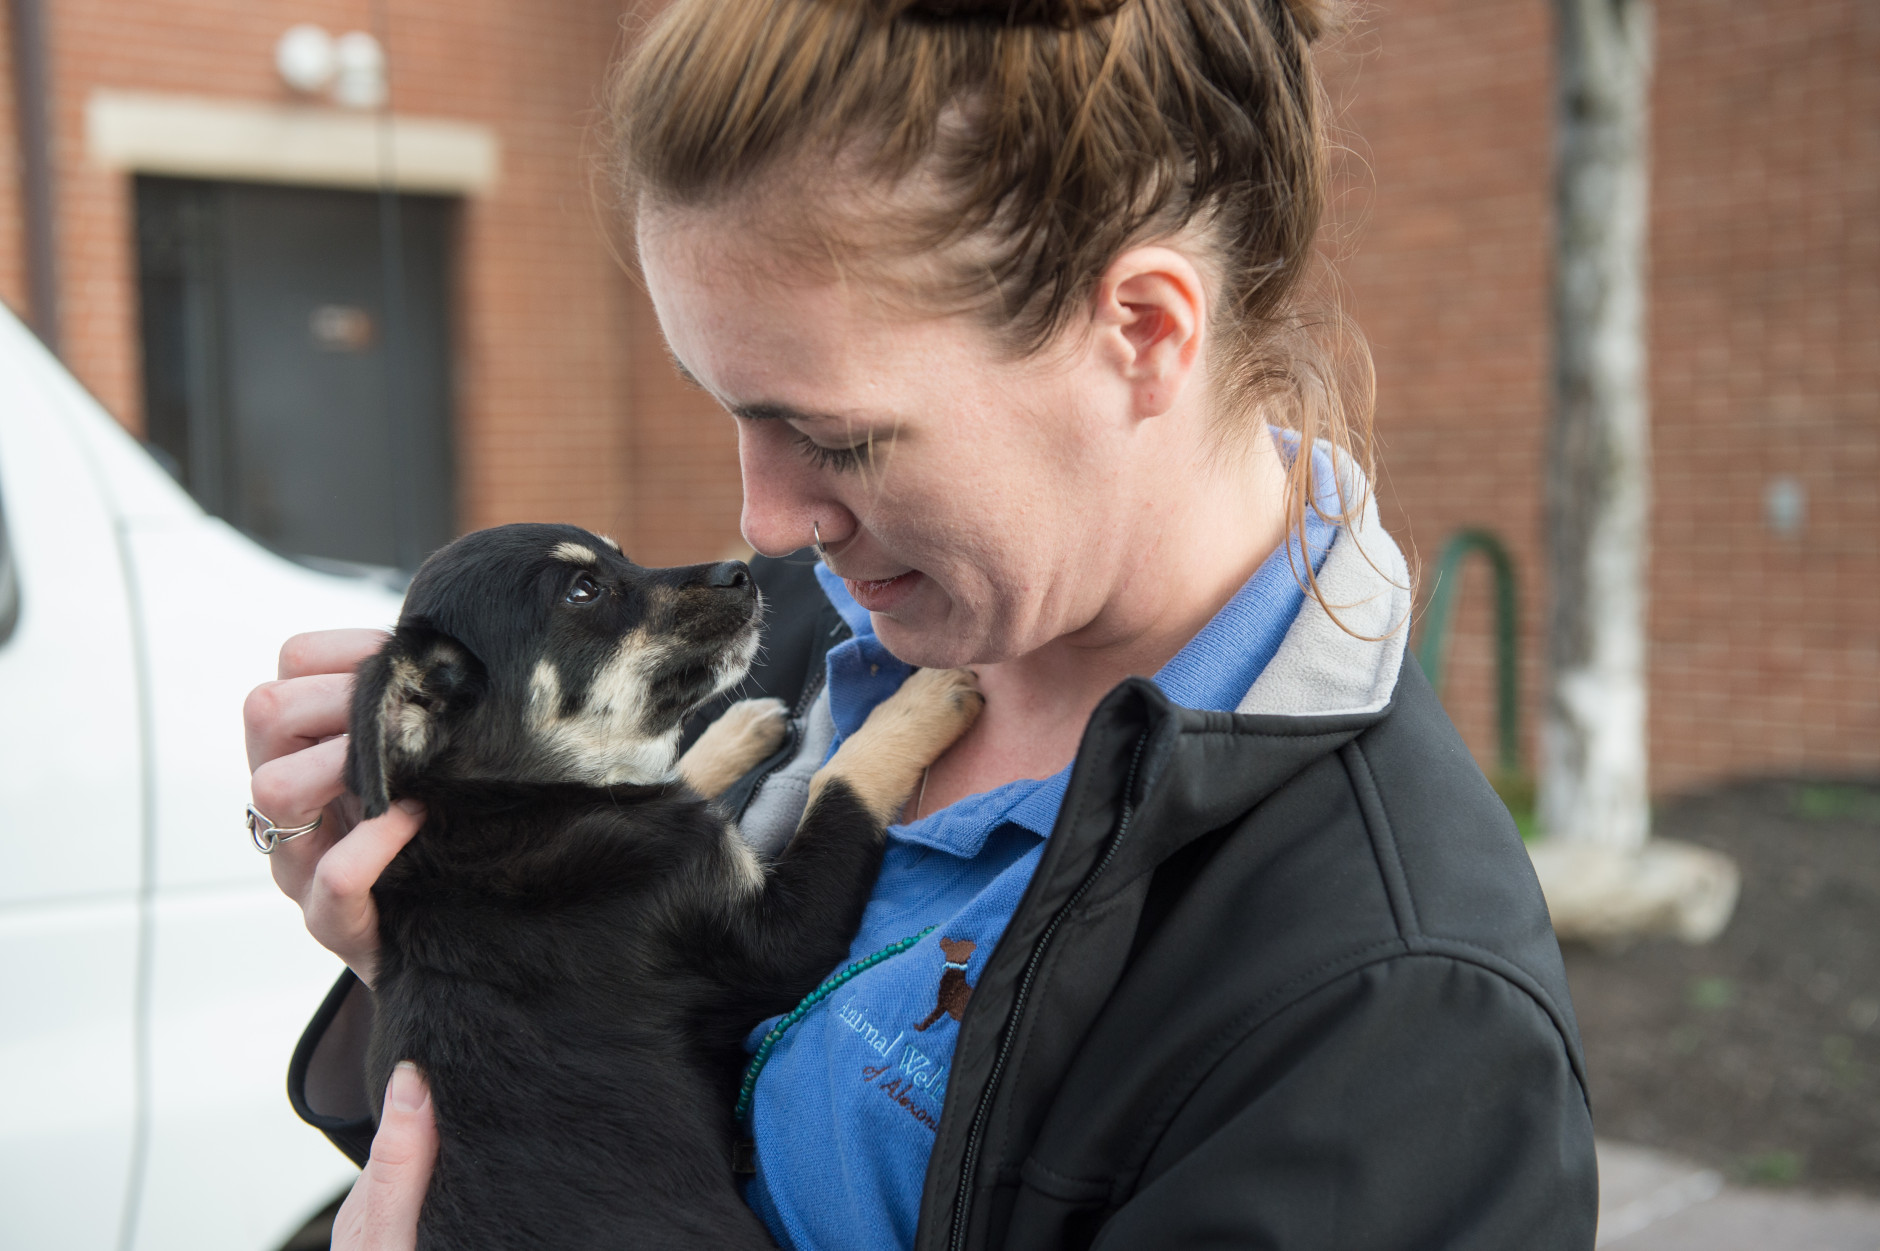 Dogs that arrived over the weekend from a dog meat farm in South Korea are picked up at the Washington Animal Rescue League by area shelters.

Here, a staff member from the Animal Welfare League of Alexandria gets kisses from Eve before transporting her to the shelter.